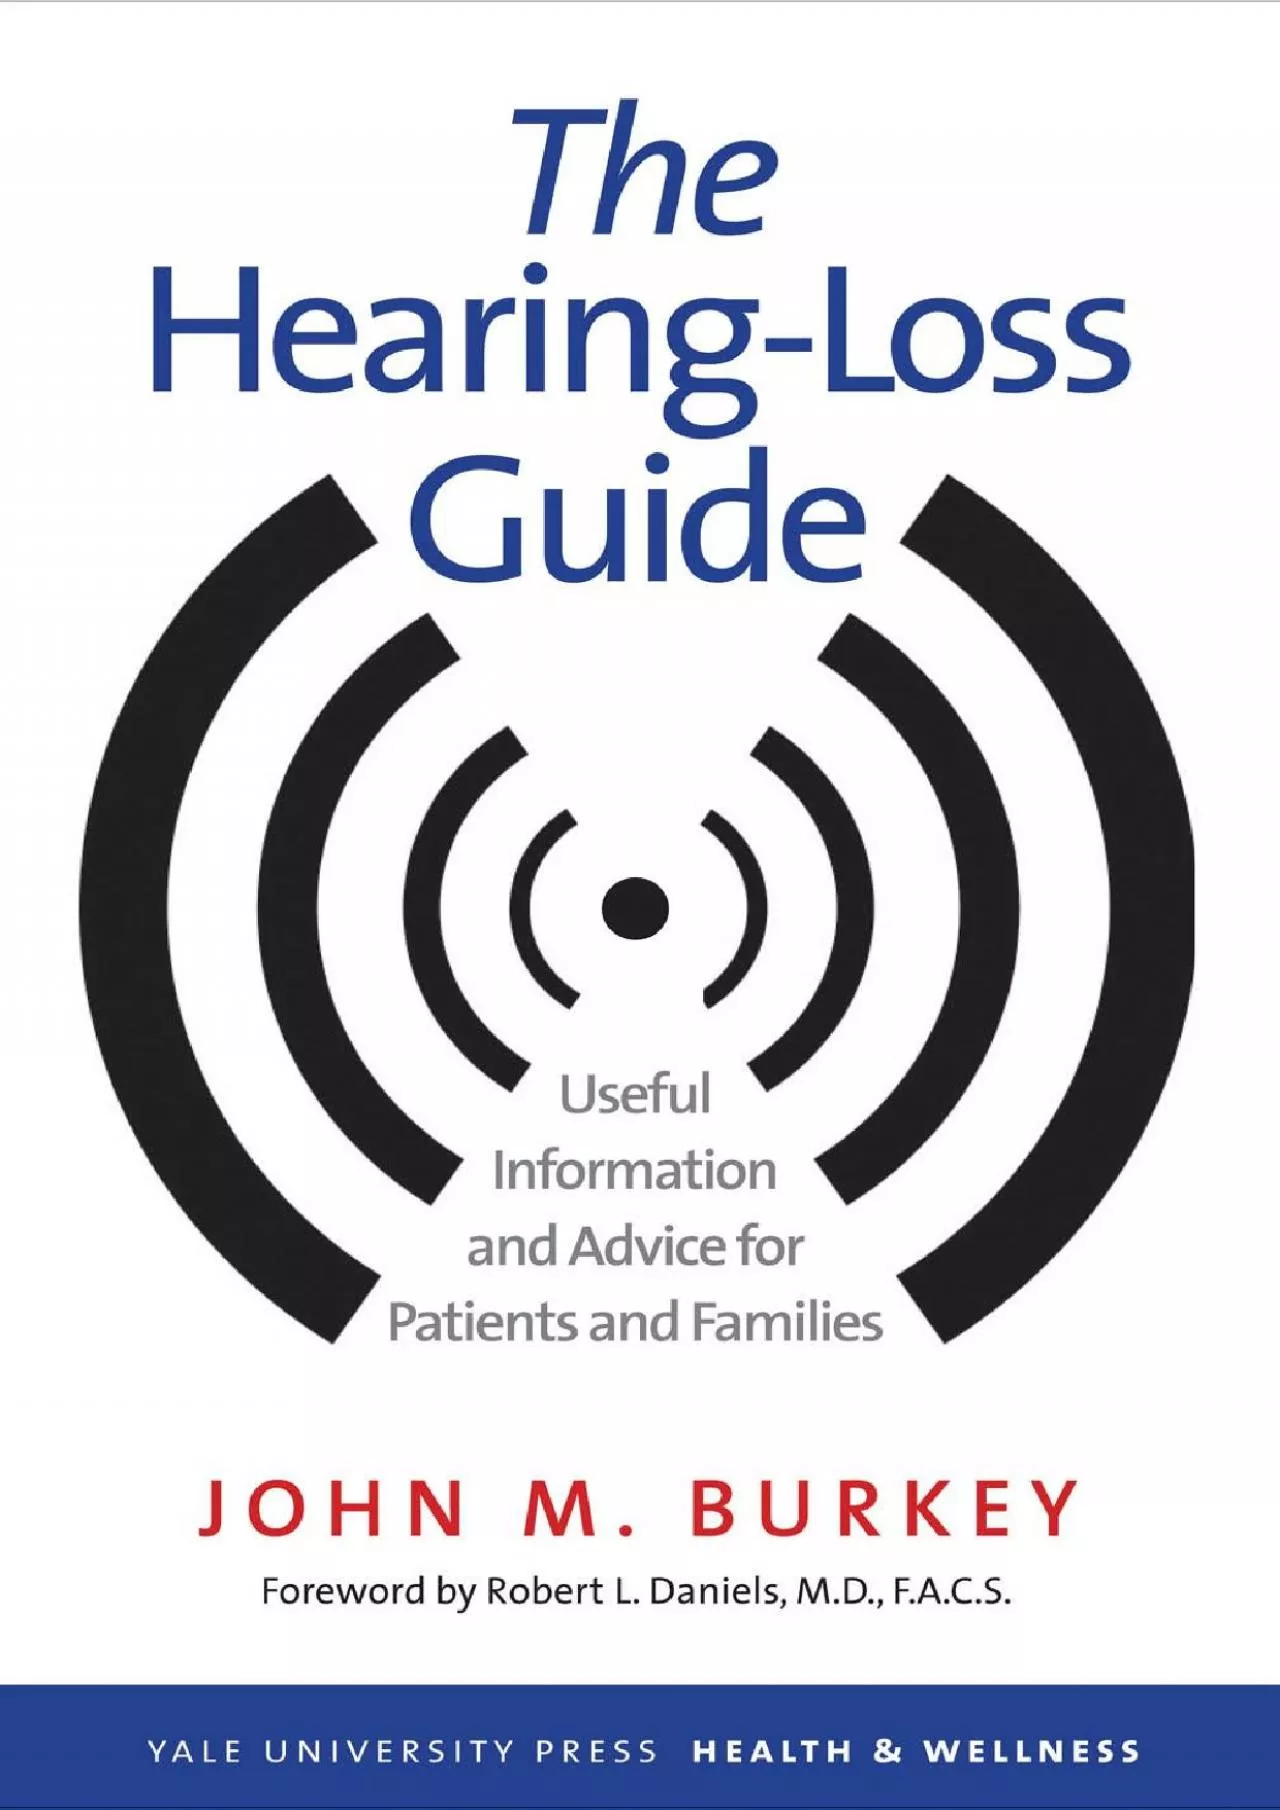 (BOOK)-The Hearing-Loss Guide: Useful Information and Advice for Patients and Families